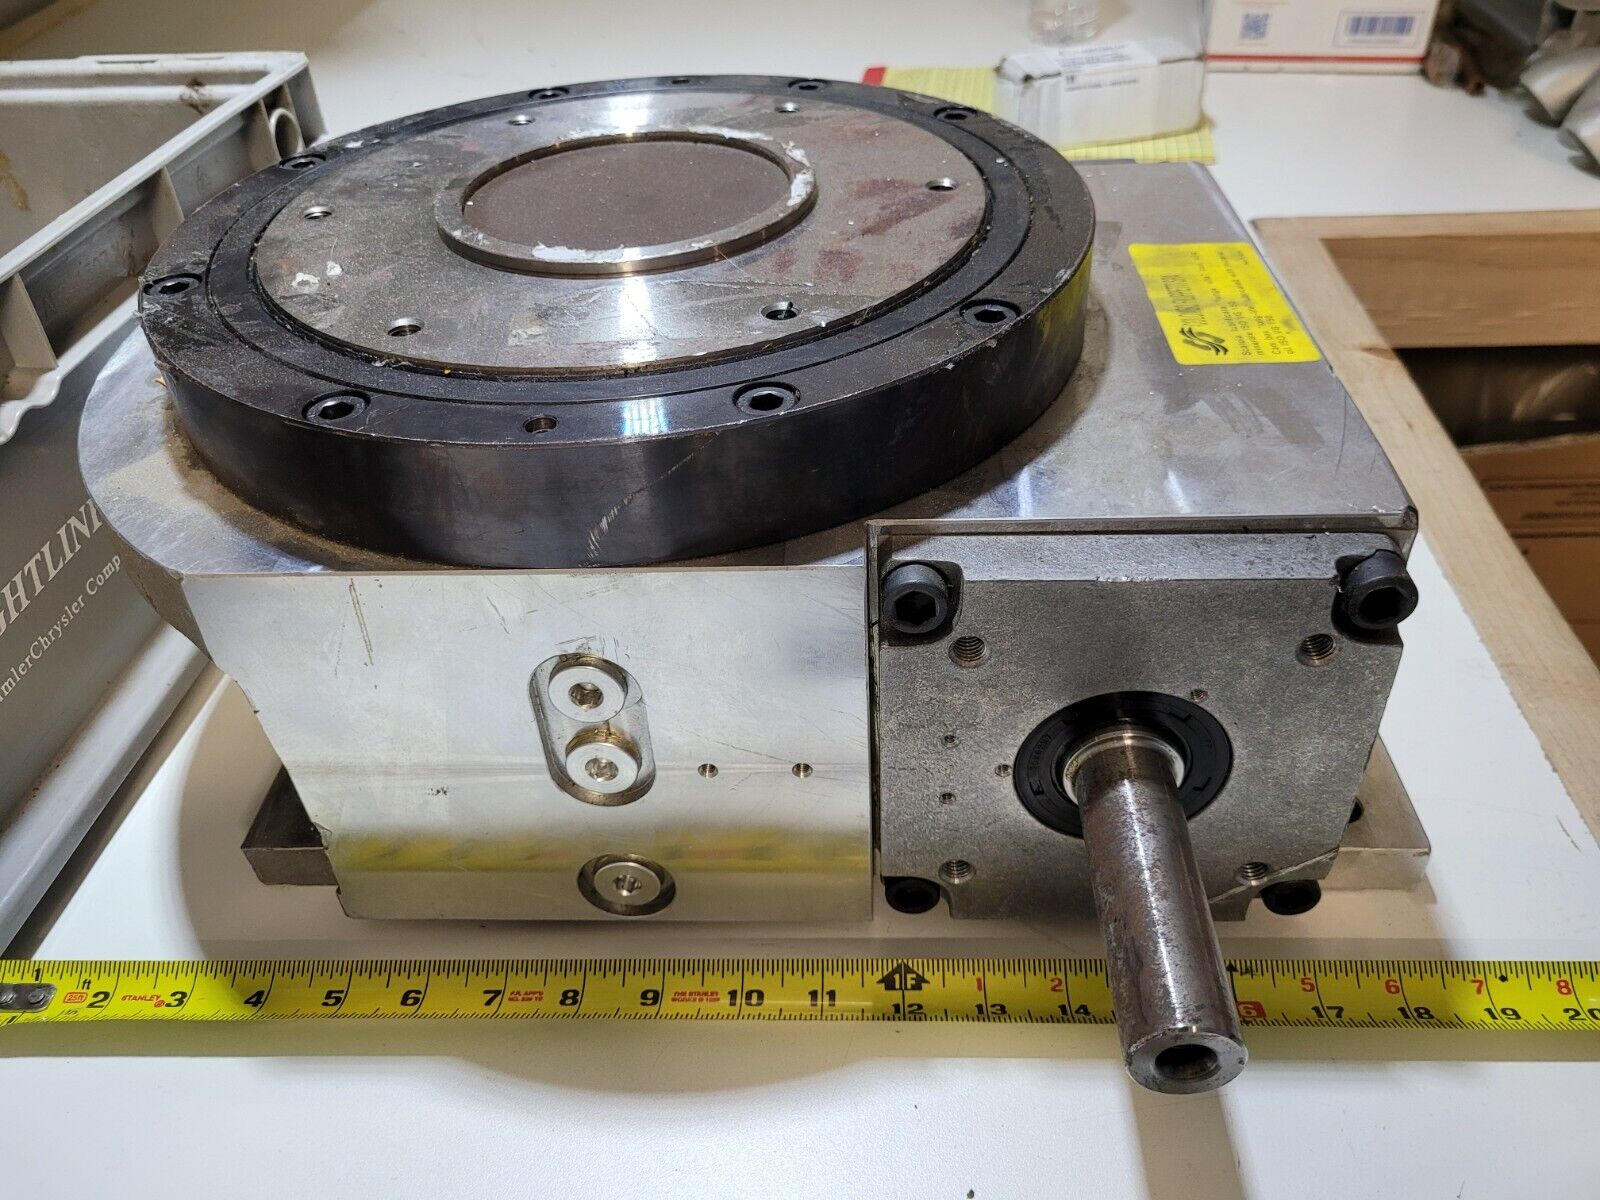 Colombo Filippetti Rigidial Rotary Index Table w/ Flange RIG 09-8-270 VL1 VCS SA